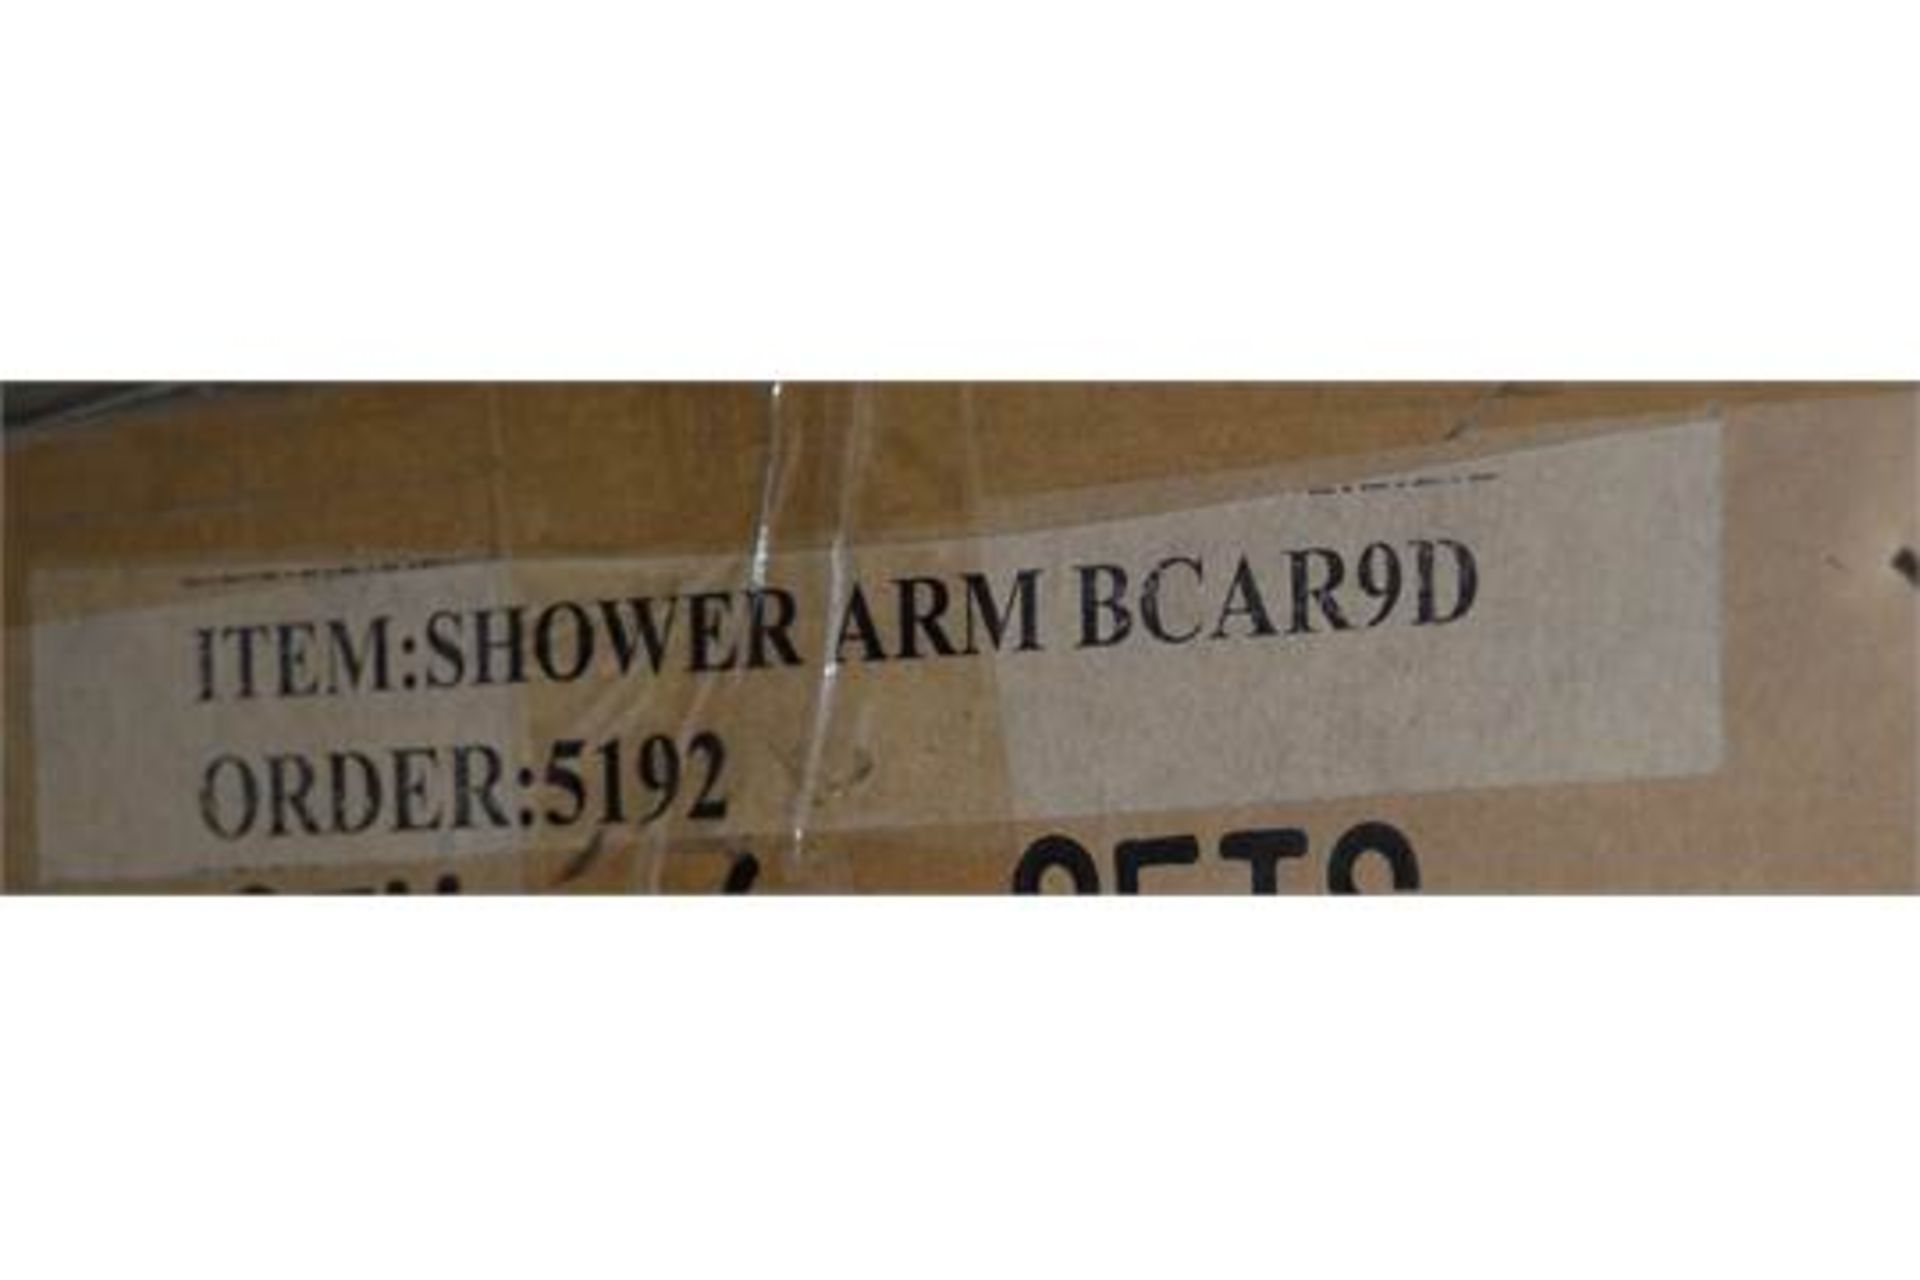 10 x Carmina Shower Arms - Solid Brass With Chrome Finish - Brand New Boxed Stock - Approx RRP £170 - Image 5 of 6